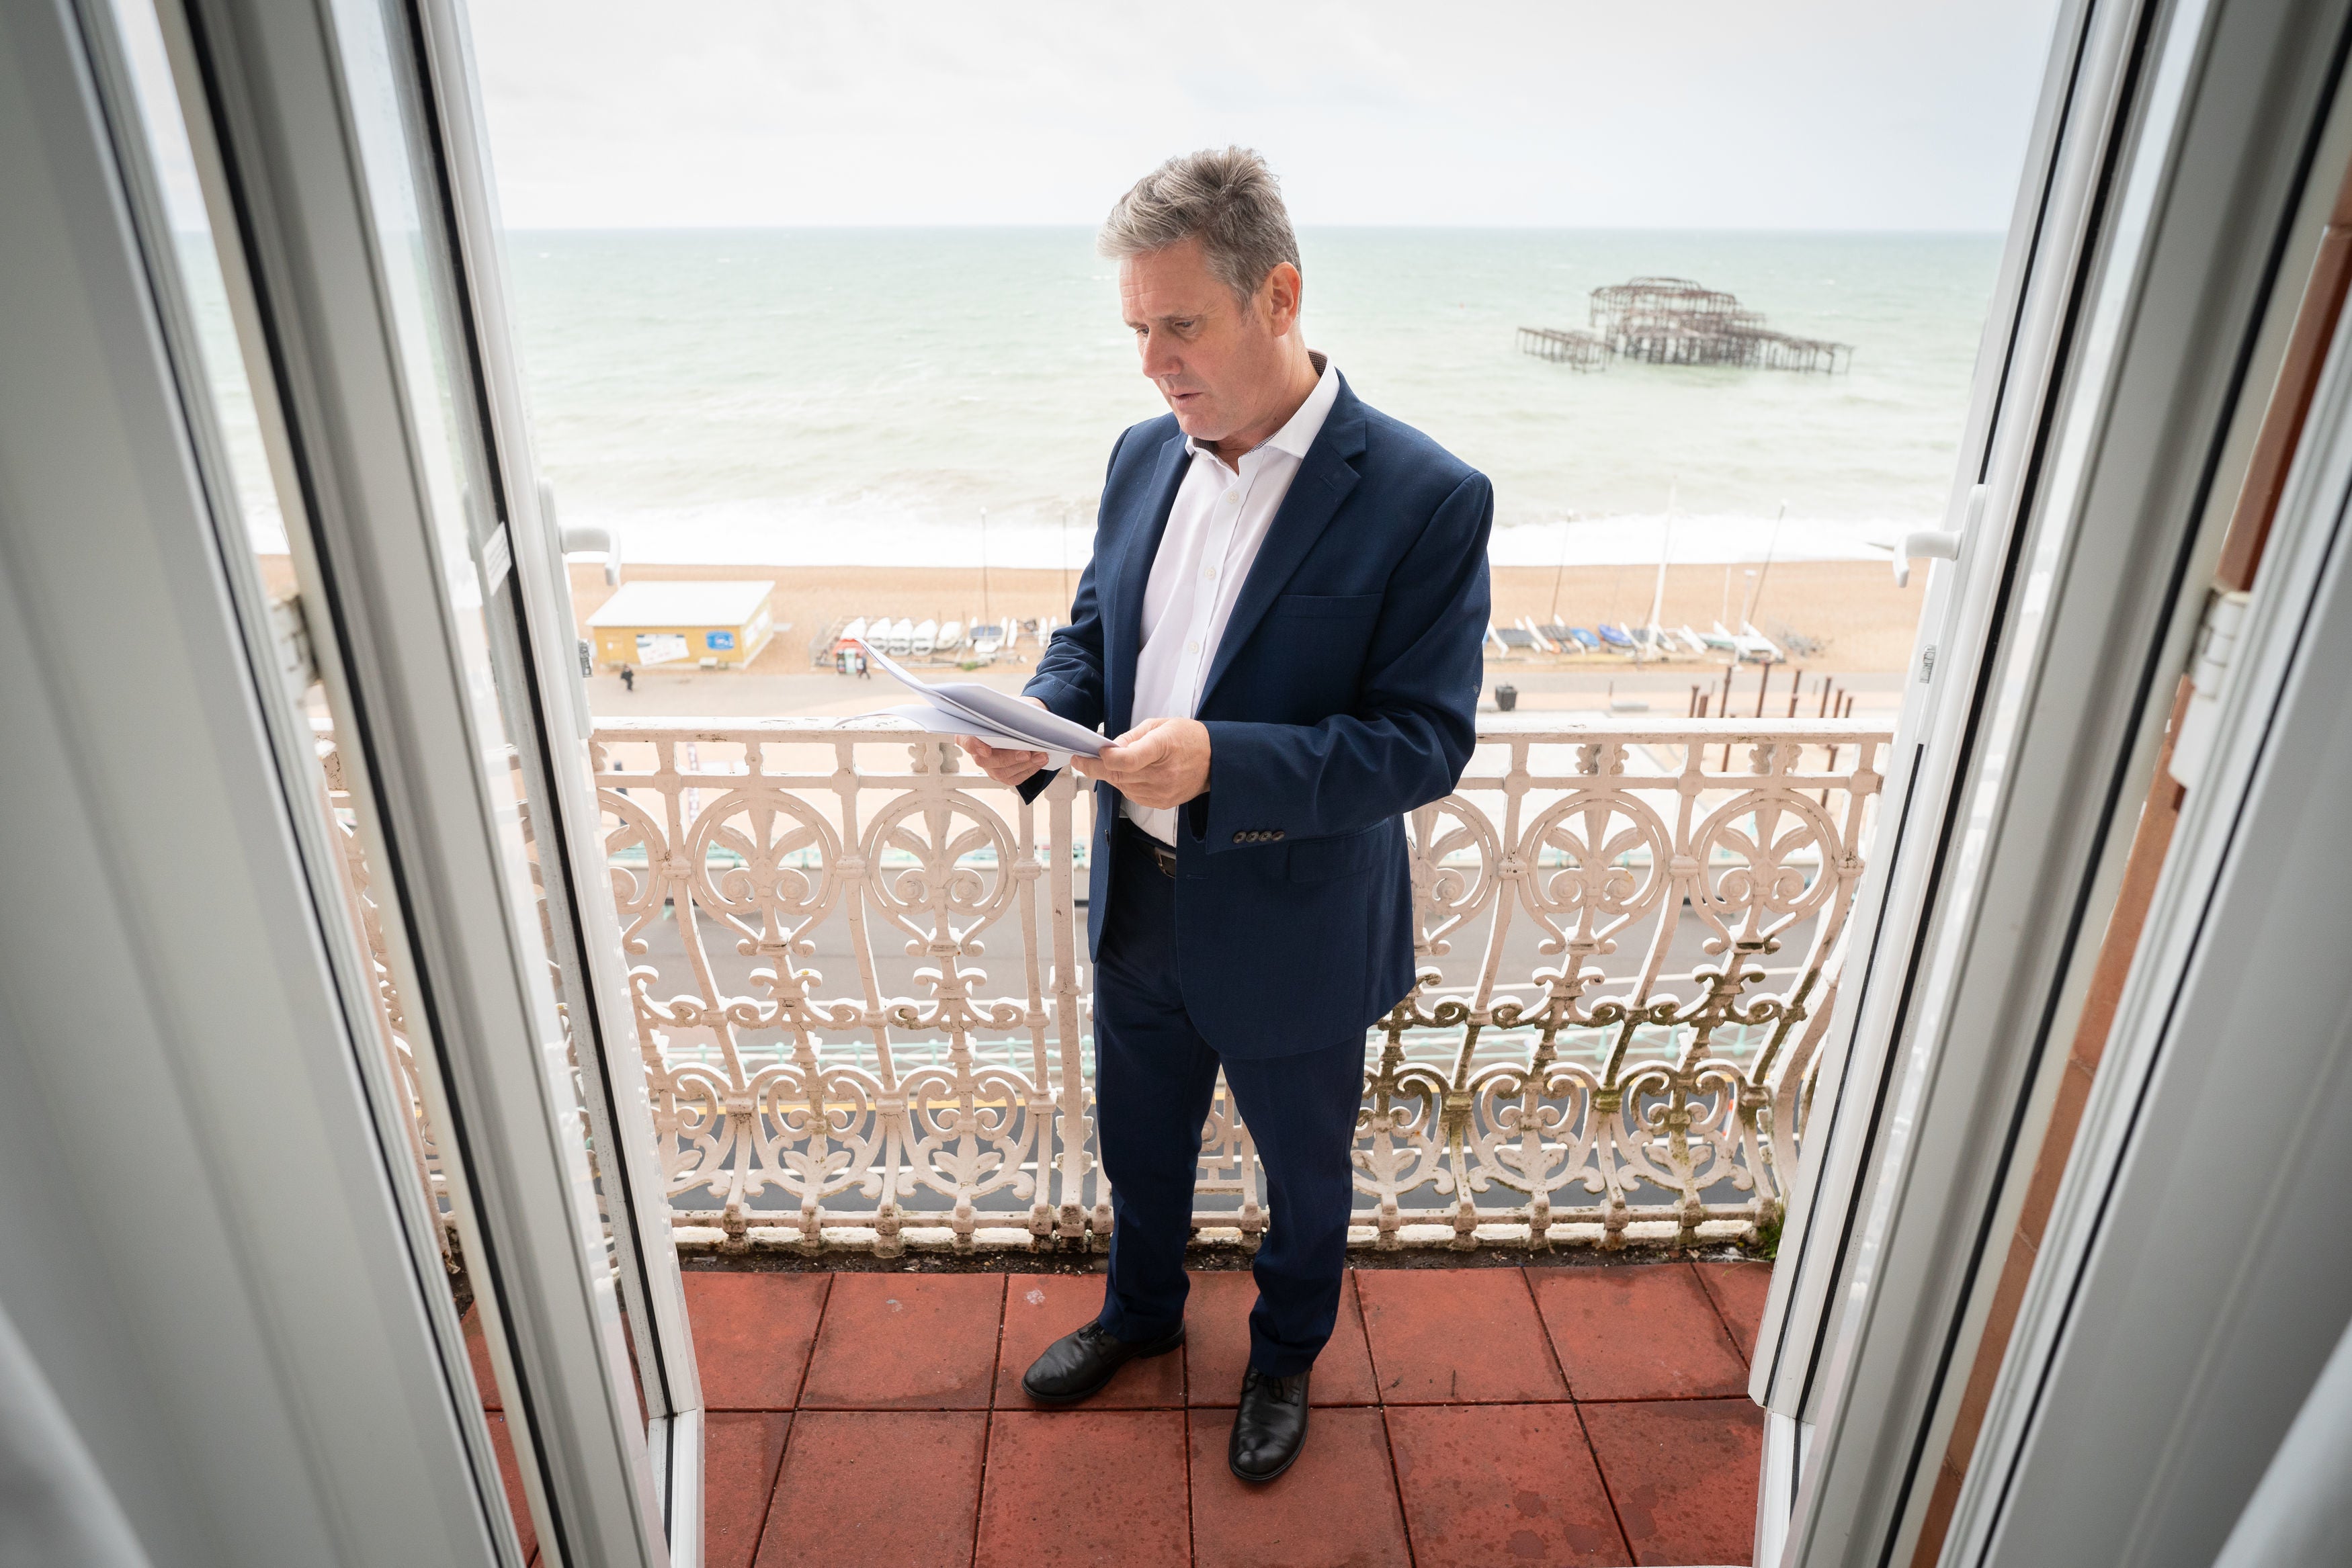 Sir Keir Starmer prepares his Labour Party conference speech in his hotel room in Brighton yesterday